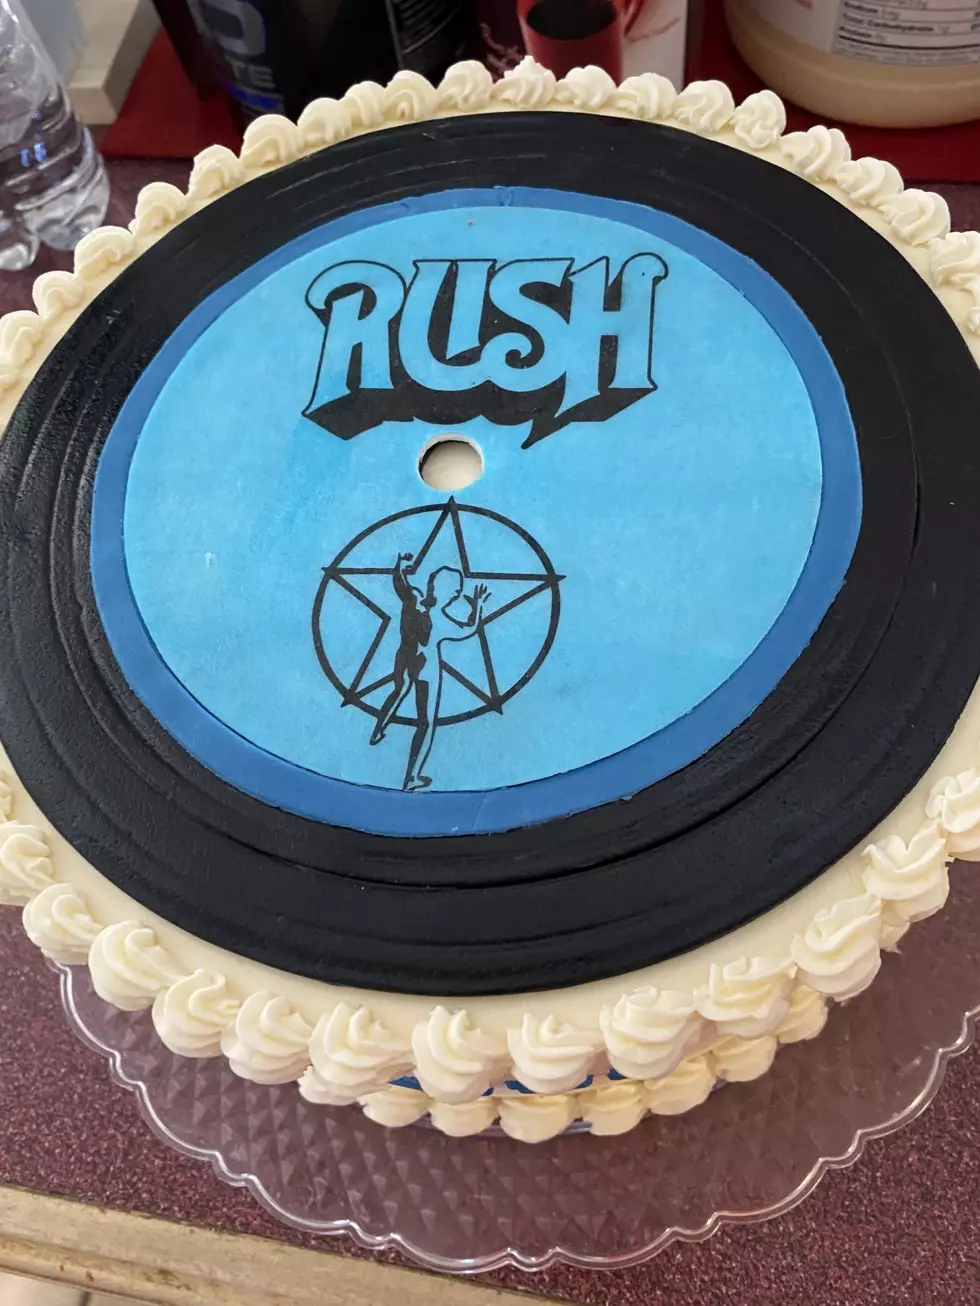 How I Got a Special Present From Rush